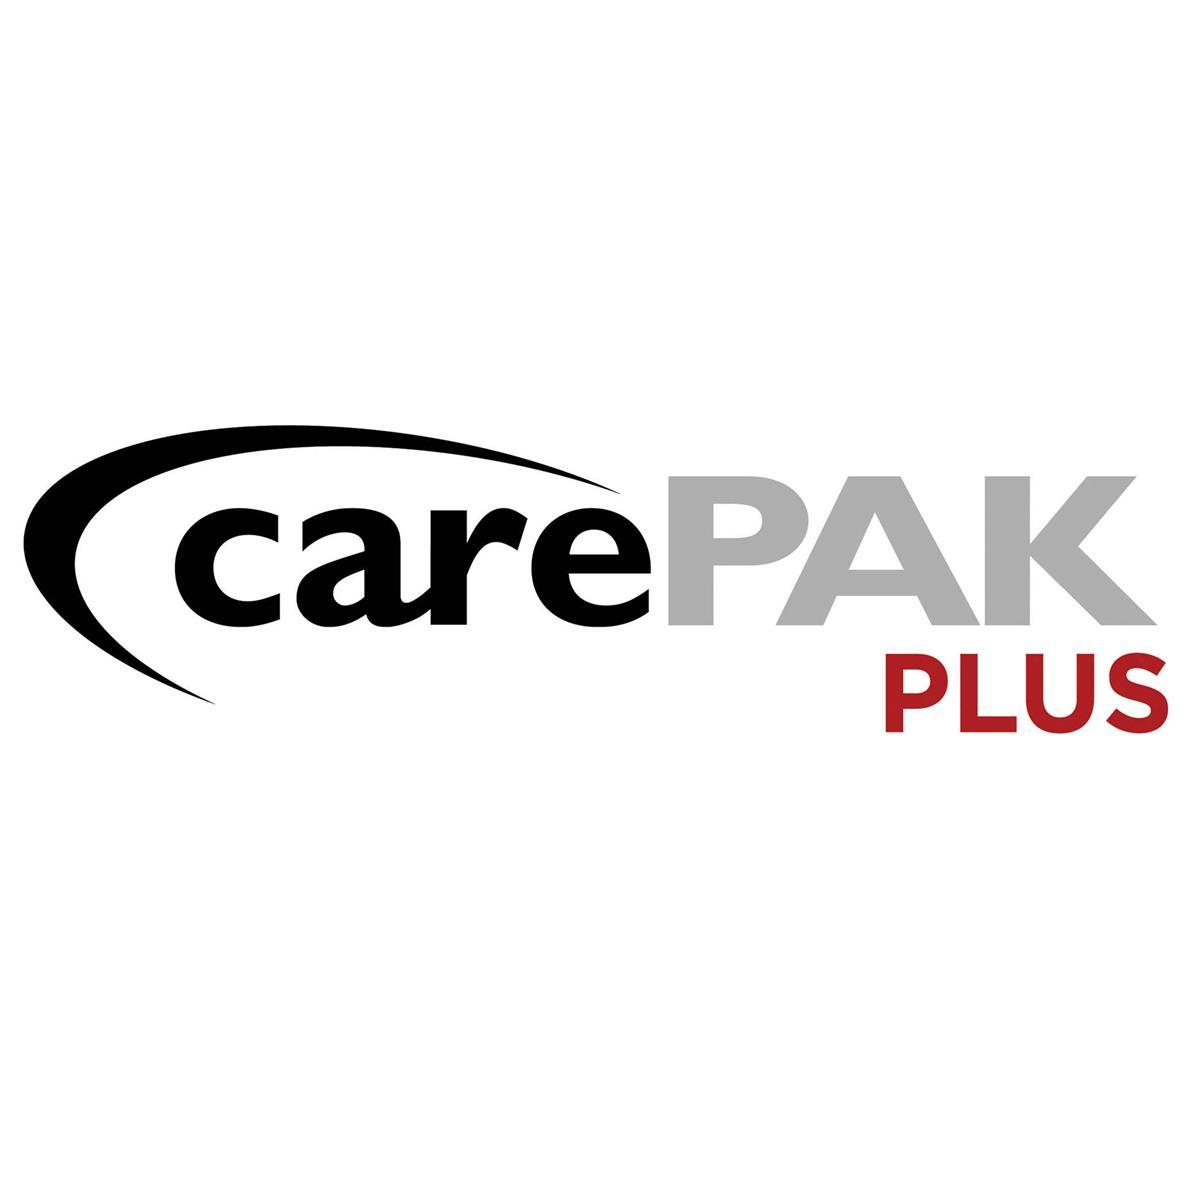 Canon CarePAK PLUS 4 Year Protection Plan for Video Cameras (Up to $1500) -  9619B074AA